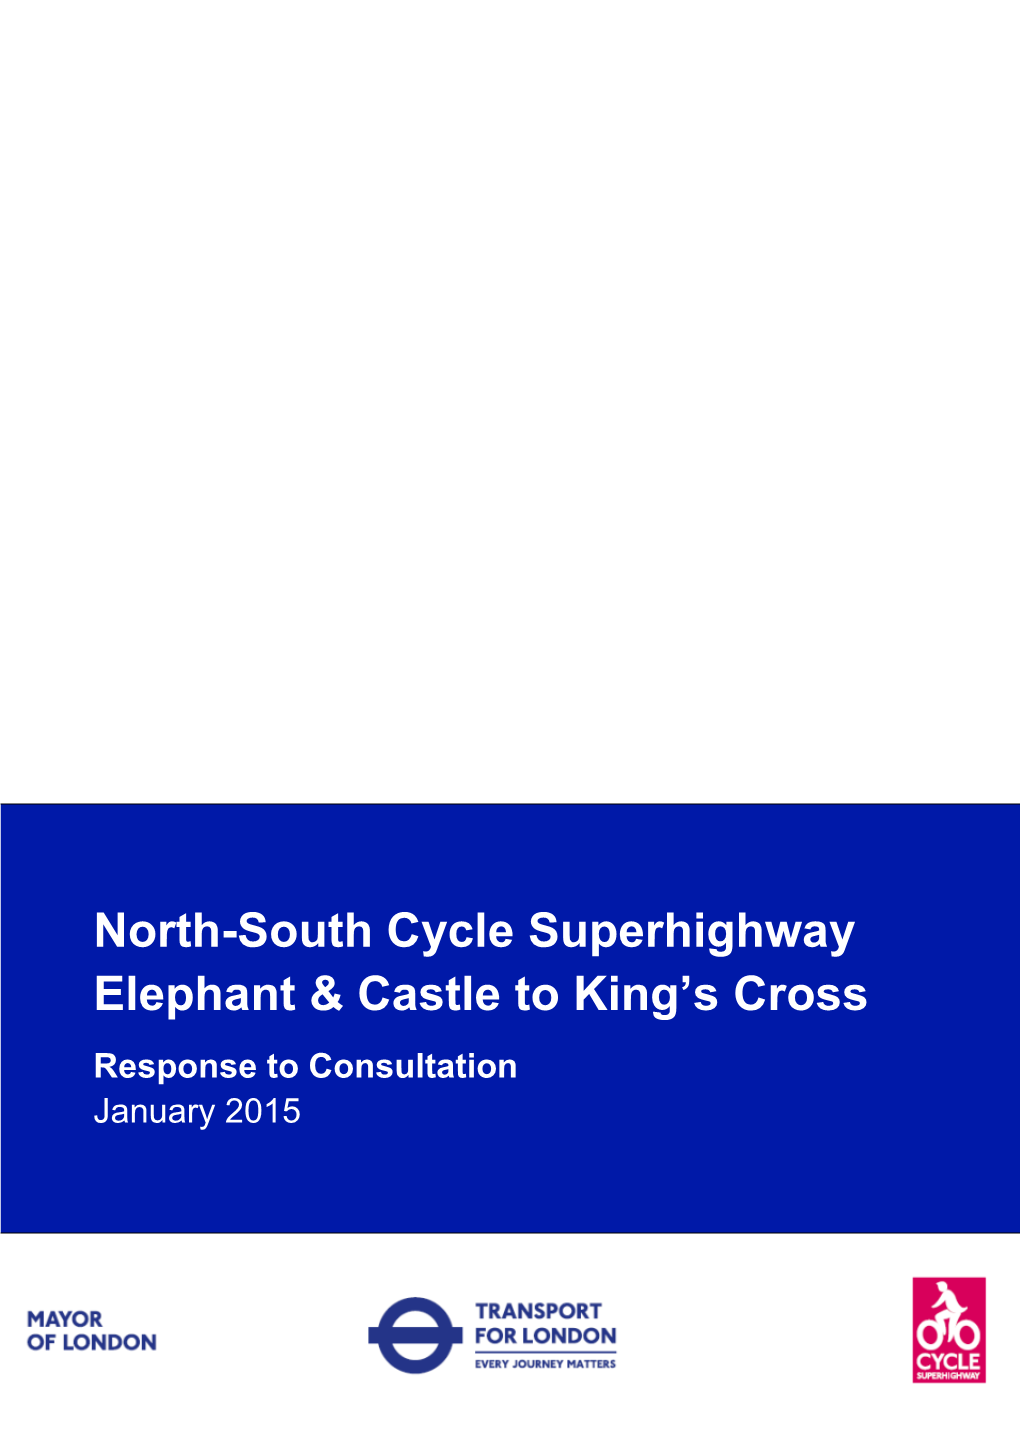 North-South Cycle Superhighway Elephant & Castle to King’S Cross Response to Consultation January 2015 Contents Executive Summary